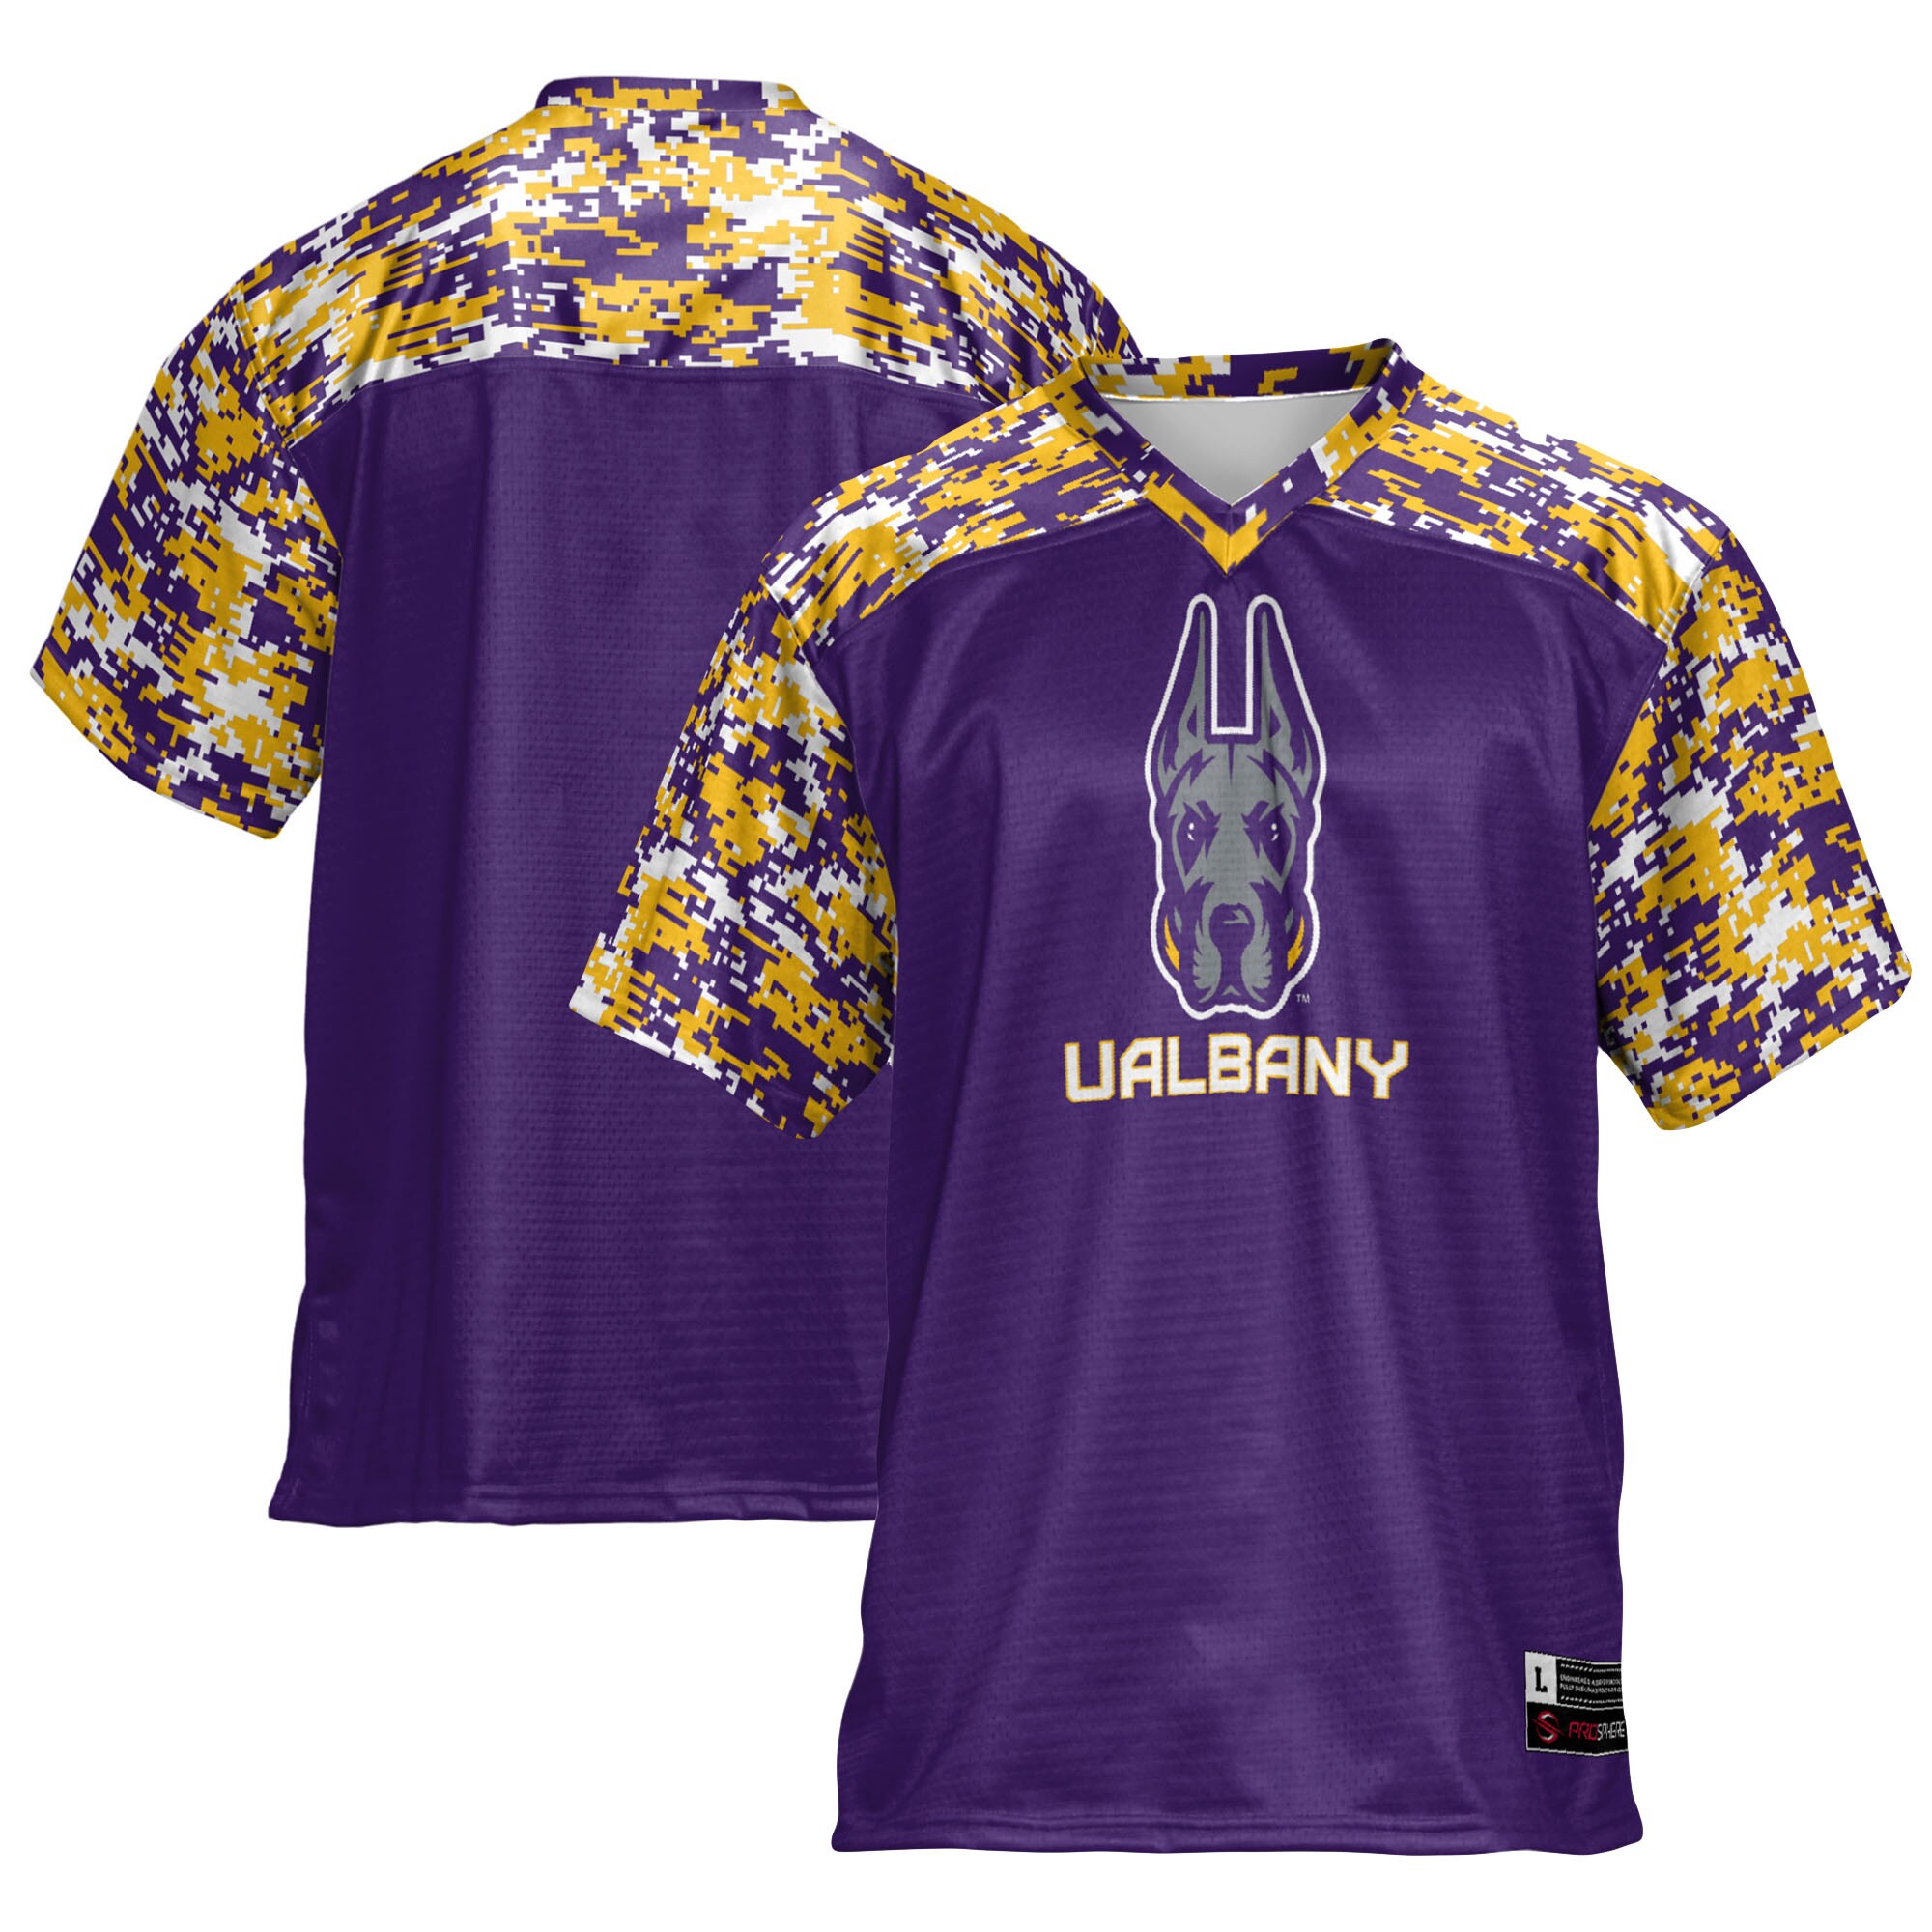 Ualbany Great Danes Prosphere  Football Shirts Jersey - Purple For Youth Women Men